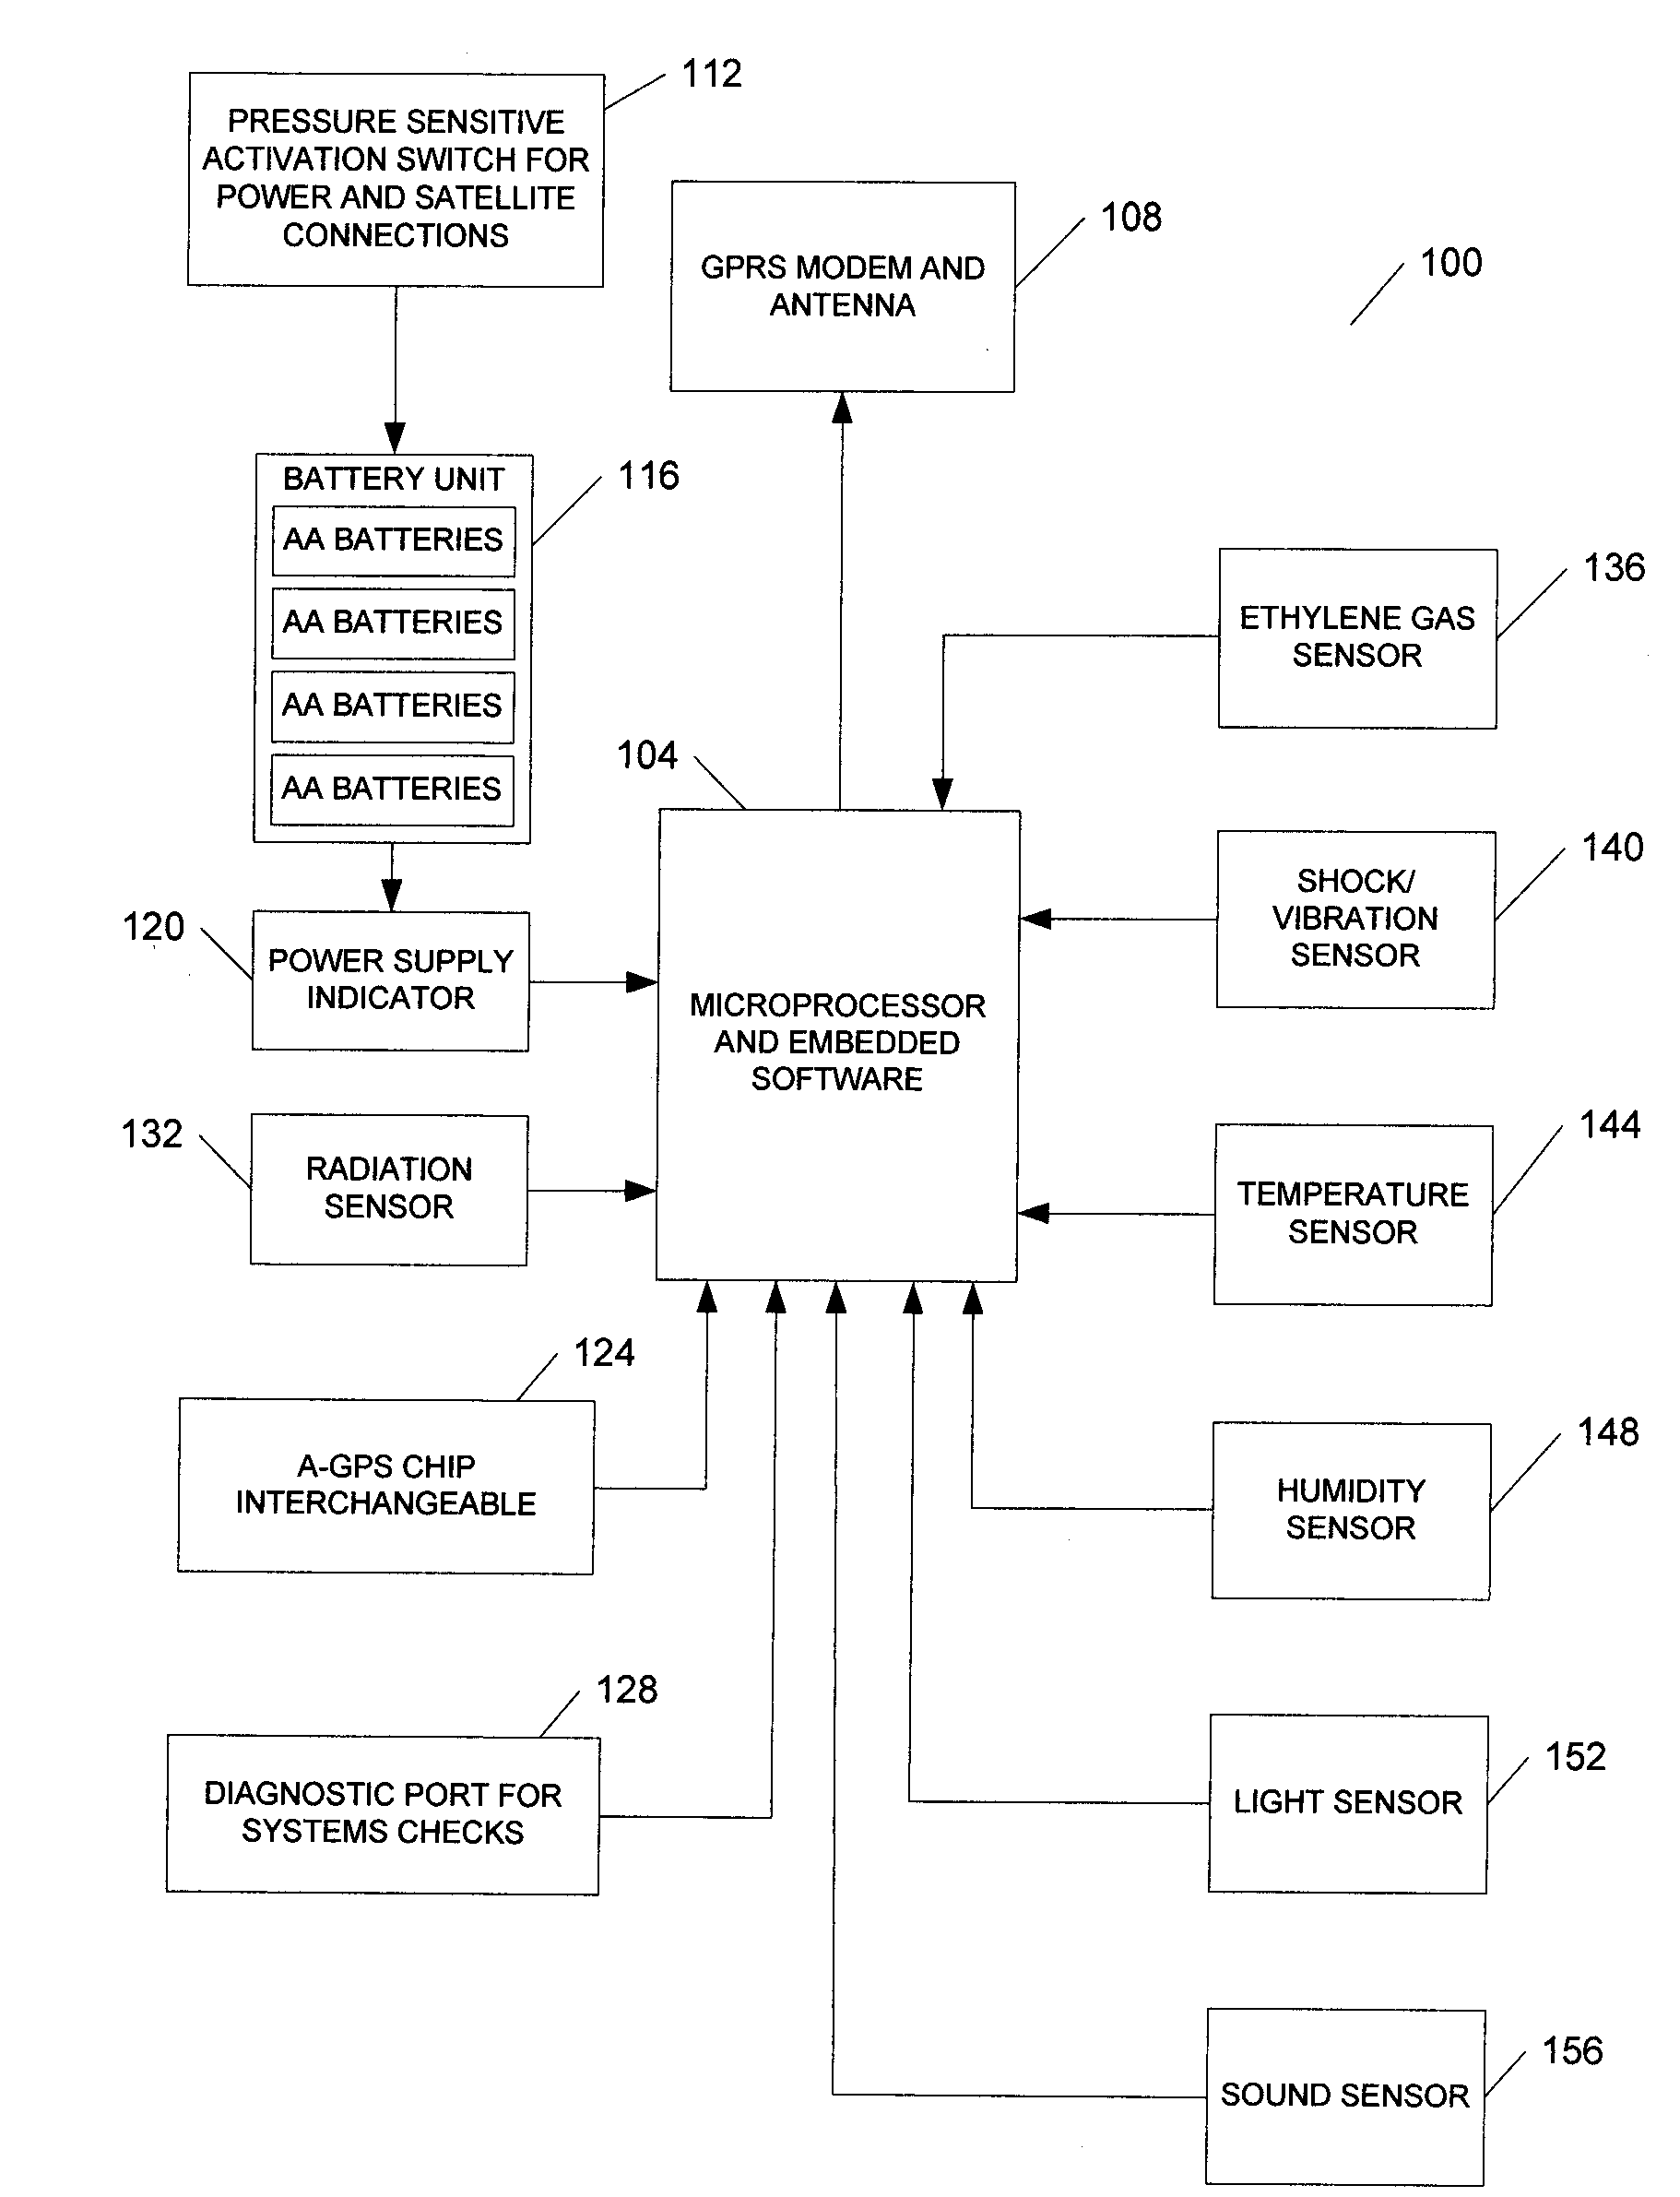 Apparatus and Method for Real Time Validation of Cargo Quality for Logistics Applications